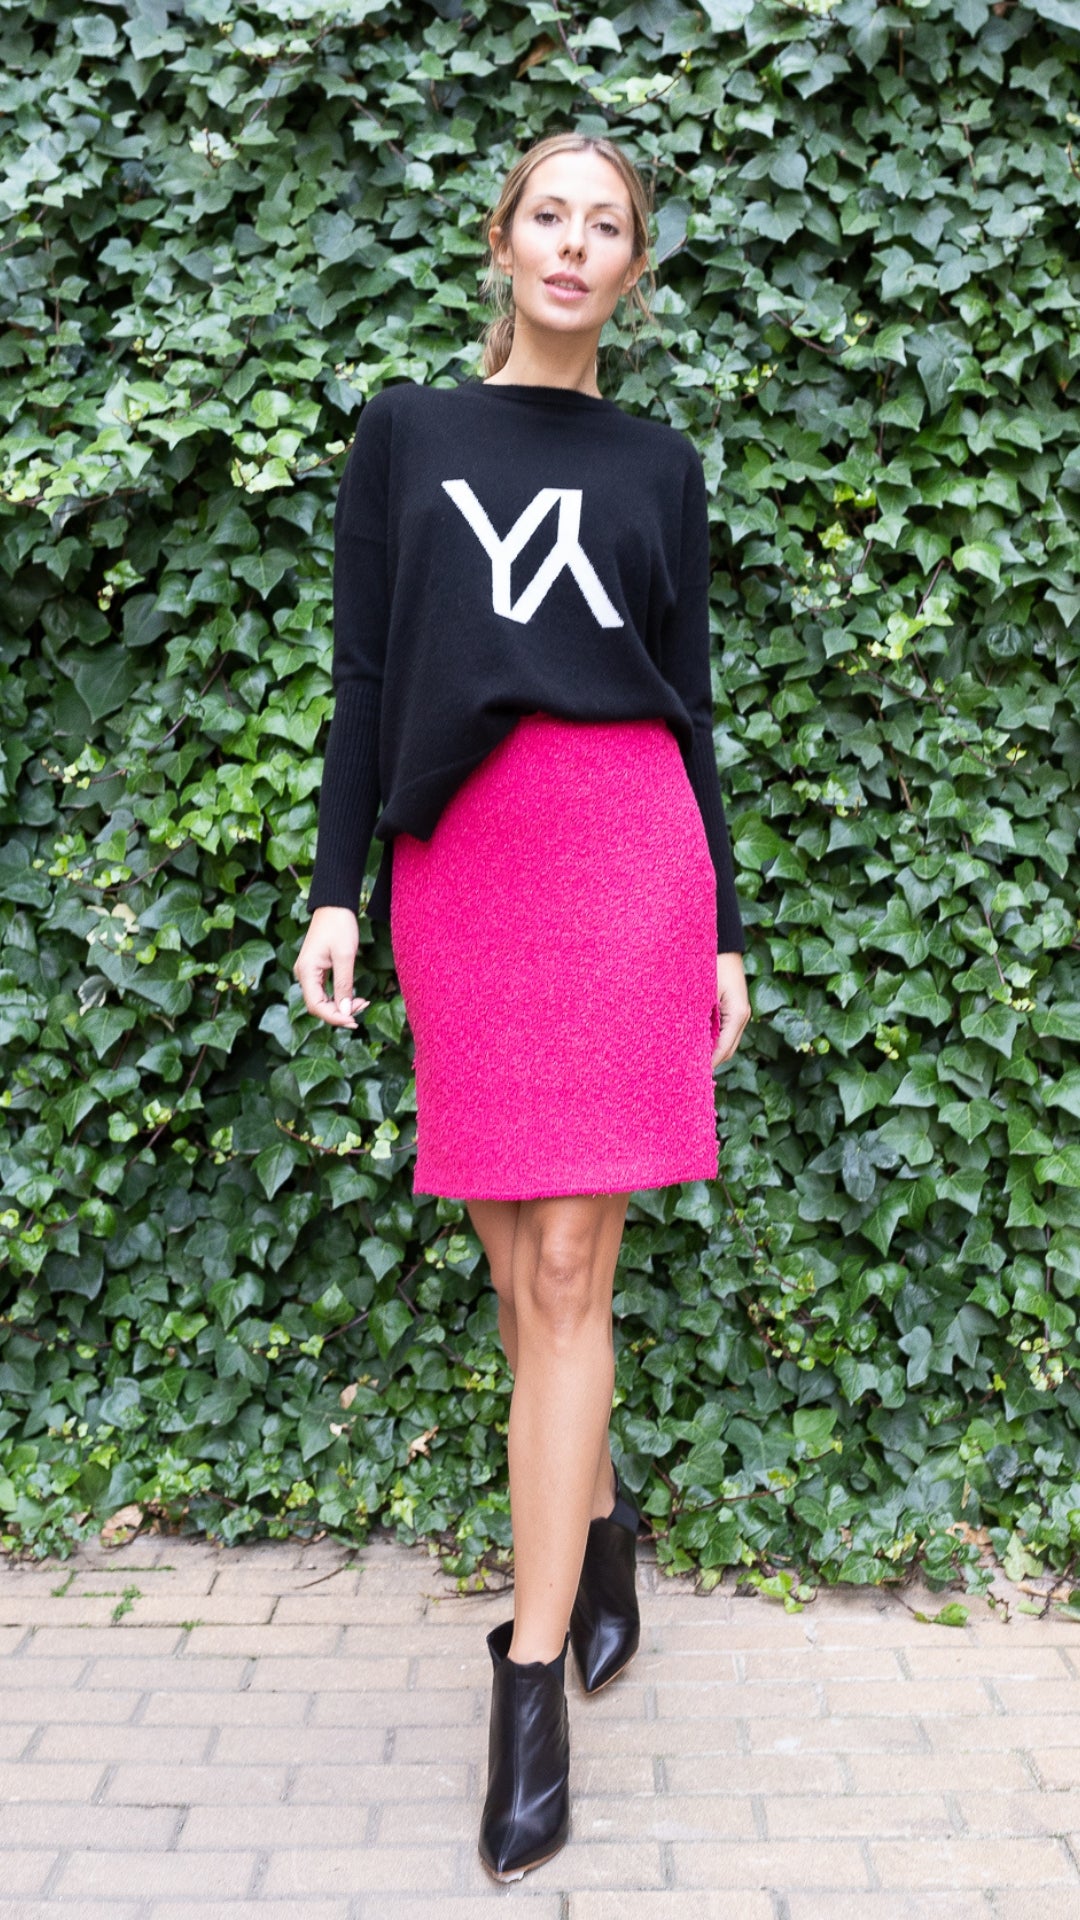 St. John Boucle Knit Skirt Hot Pink Mini Skirt Metallic Luxury Knitwear Experience 27 Madrid with side hem cut outs. Shown on model facing front.